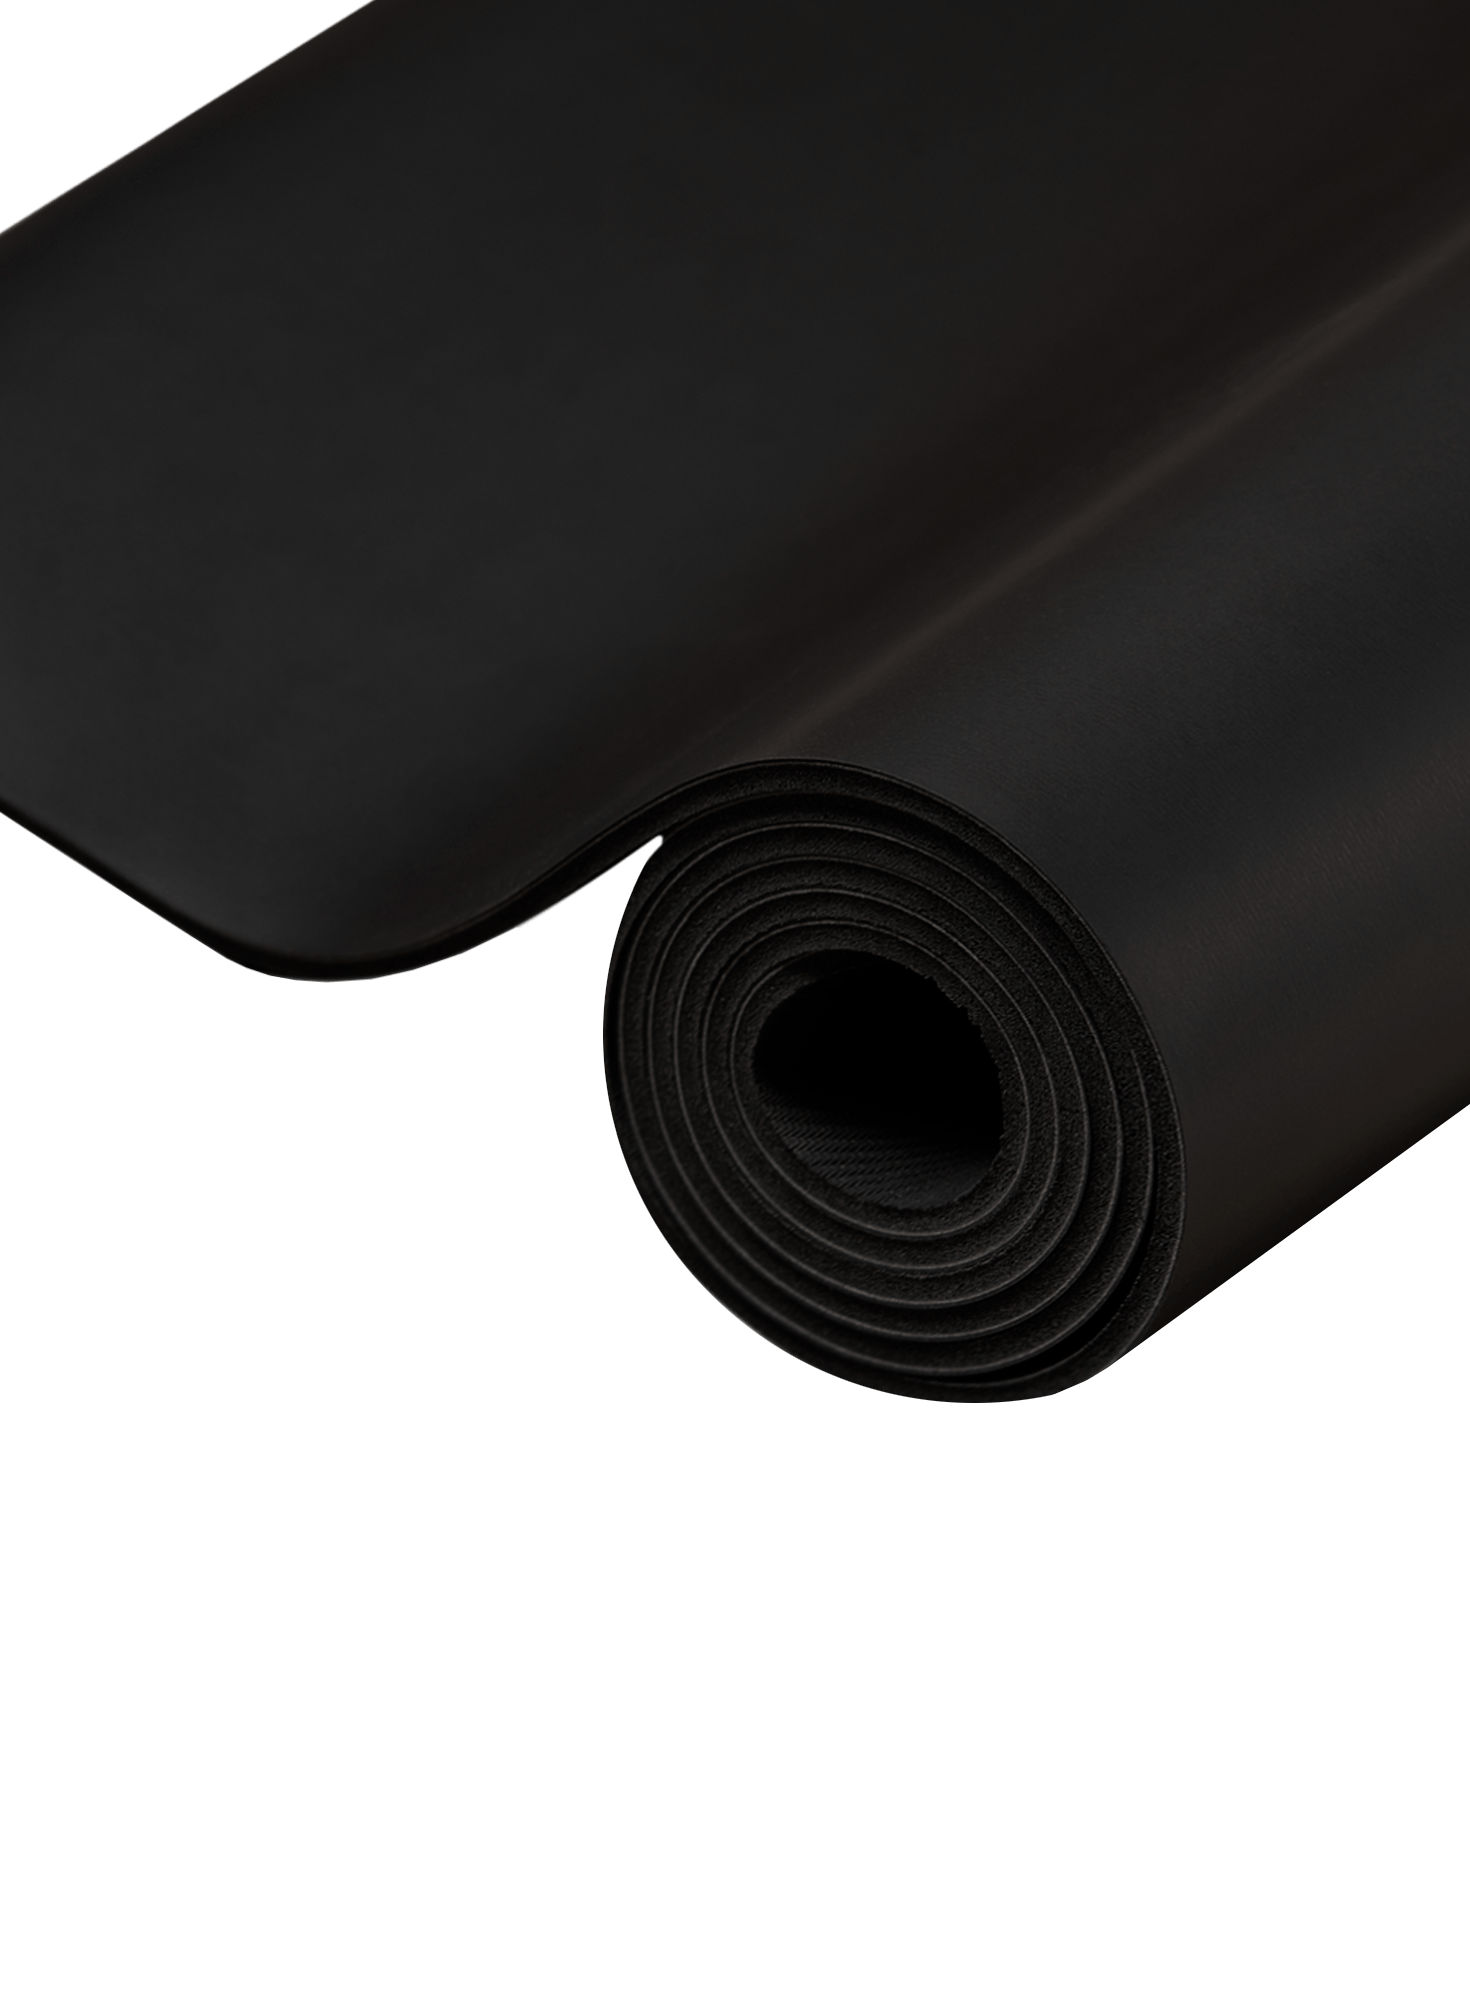 sports authority exercise mat